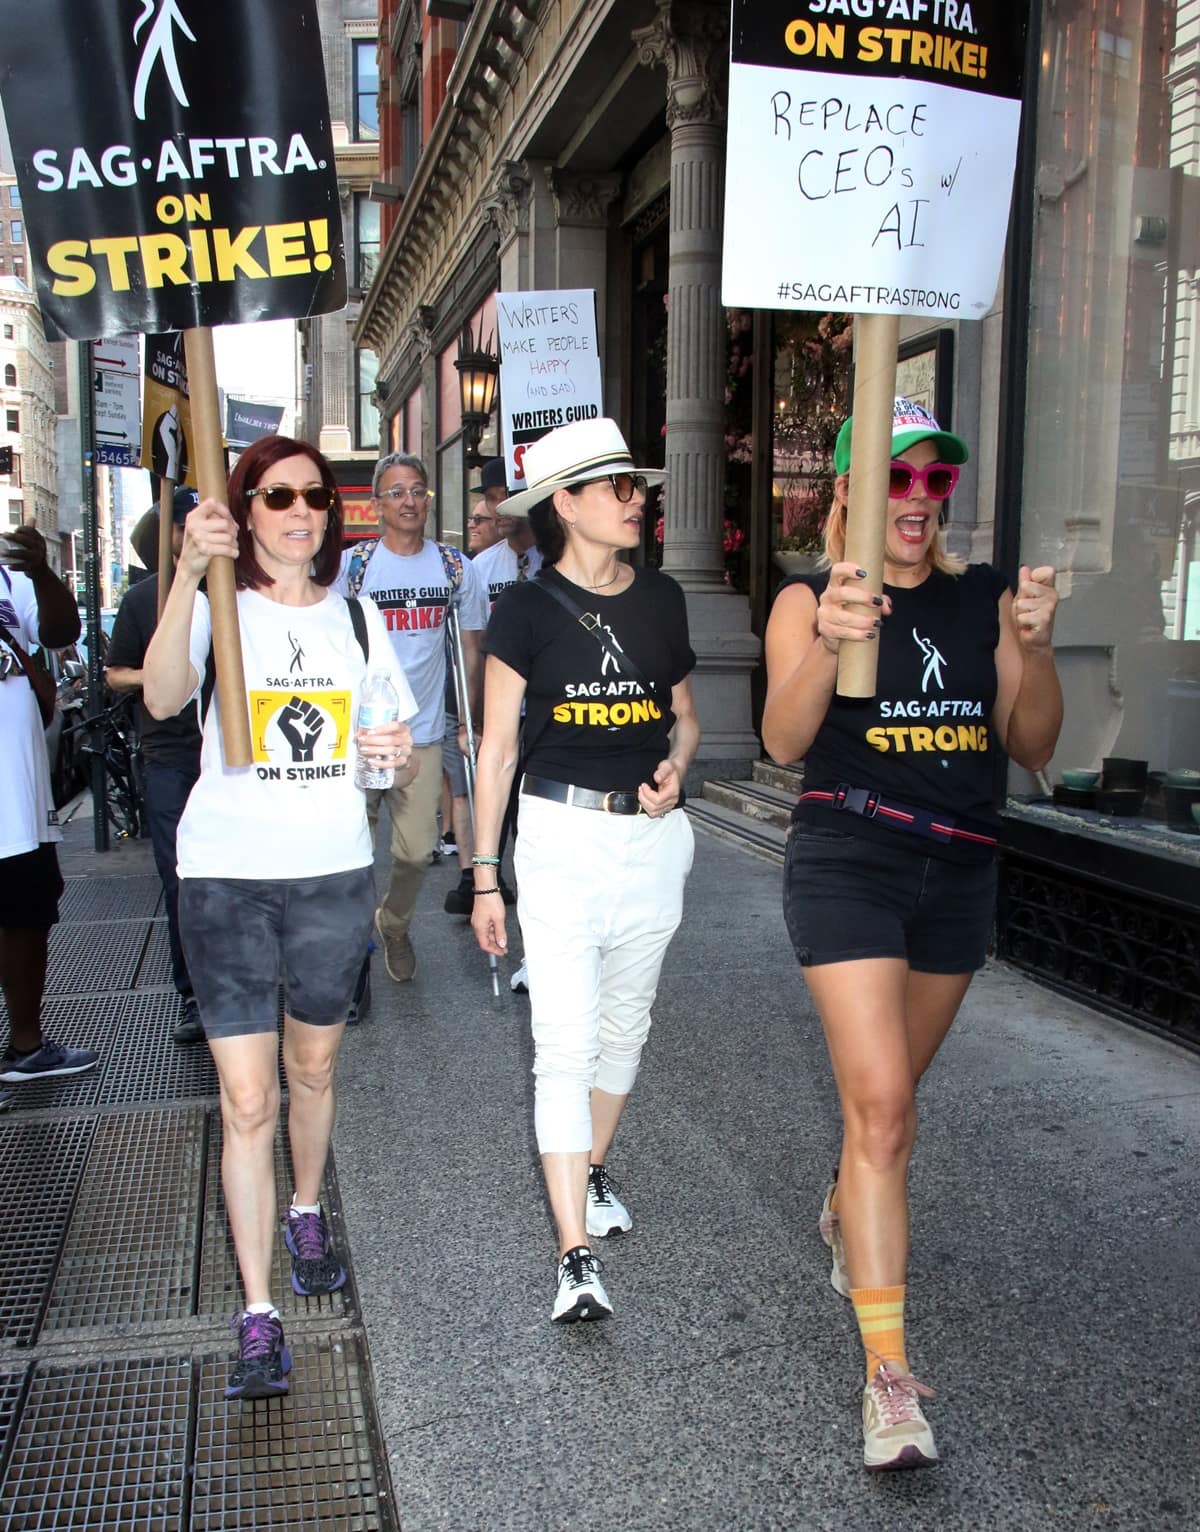 (L-R) Carrie Preston, Julianna Margulies, and Busy Philipps, all members of the Screen Actors Guild - American Federation of Television and Radio Artists (SAG-AFTRA), are seen at the SAG-AFTRA strike